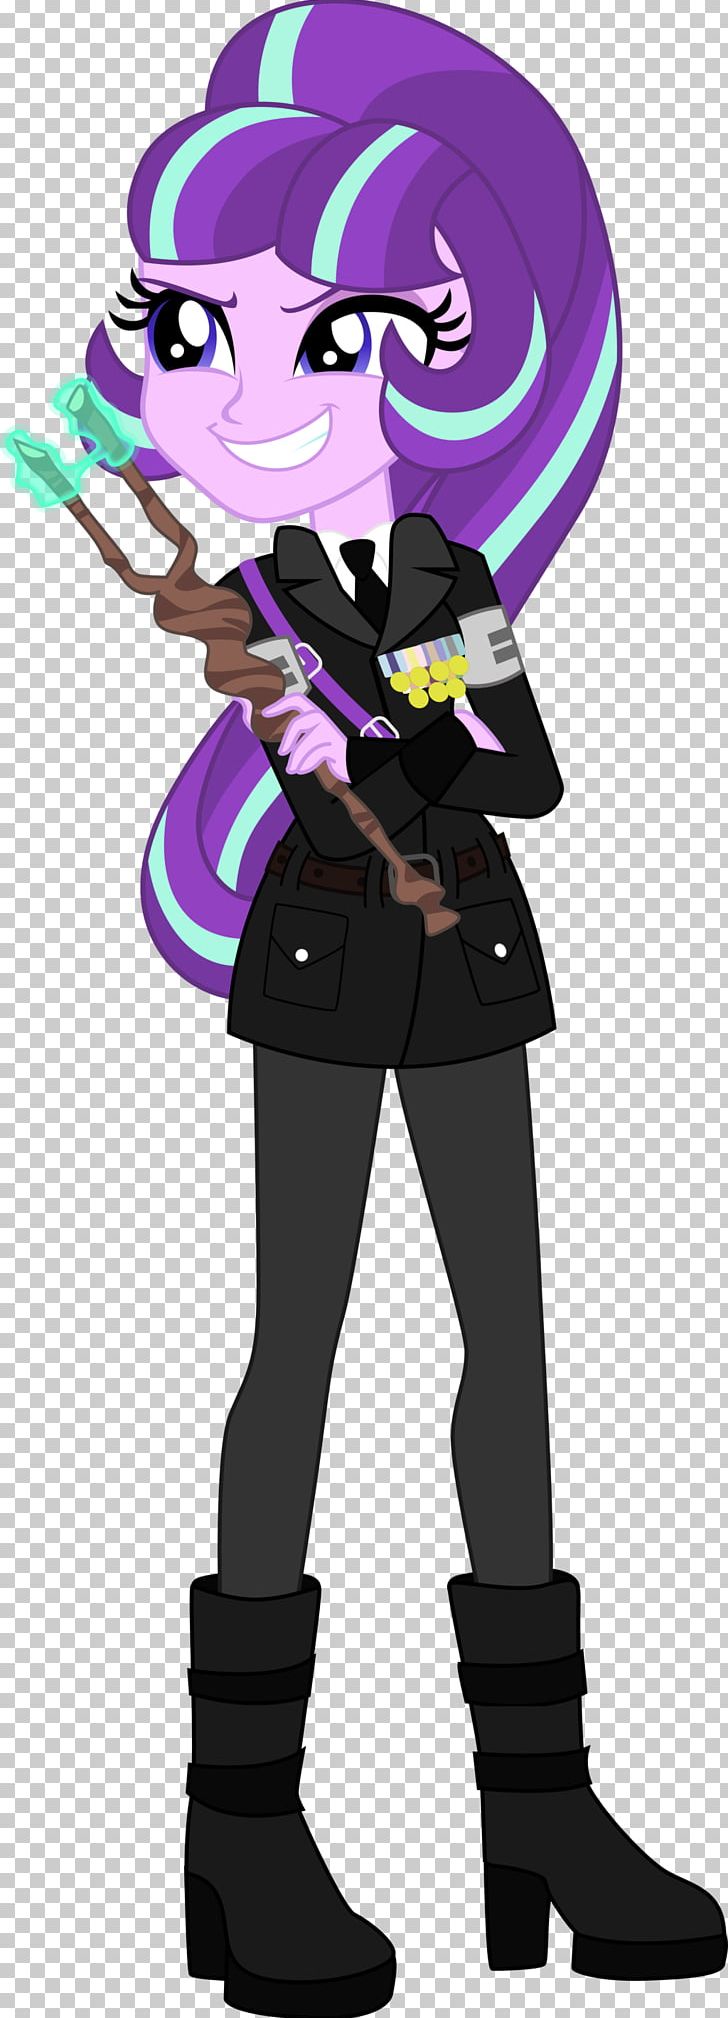 Twilight Sparkle My Little Pony: Equestria Girls Rarity Sunset Shimmer PNG, Clipart, Cartoon, Cool, Deviantart, Equestria, Equestria Daily Free PNG Download